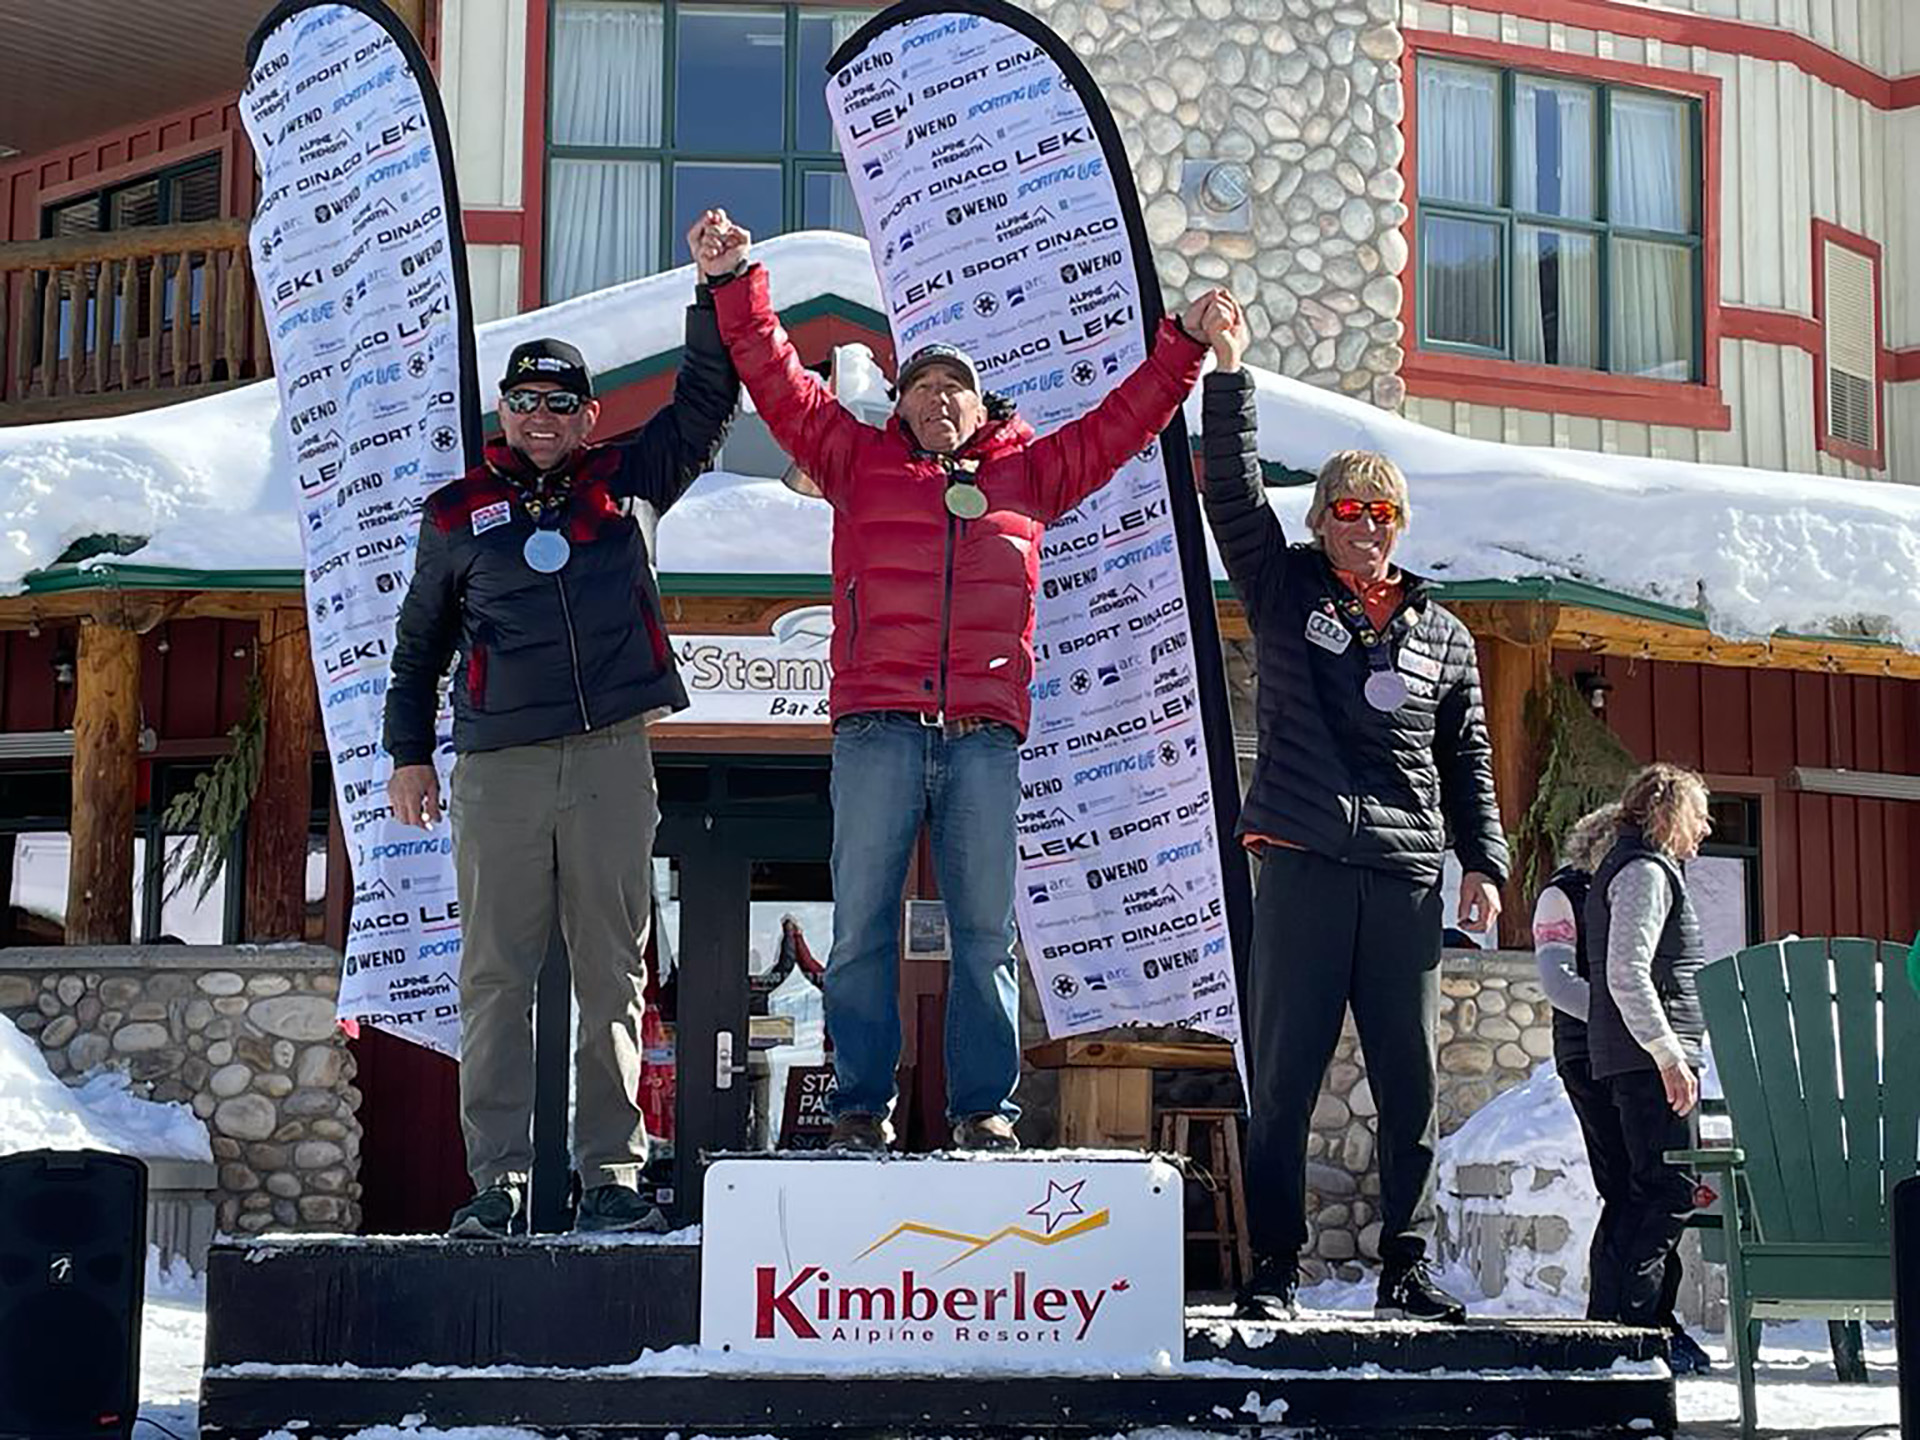 Richard Slabinski (1st) and Chris Maxwell (2nd) podium in 60-64yr Men's age classin the GS at the 2024 FIS World Criterium Masters Event at Kimberley Alpine Resort